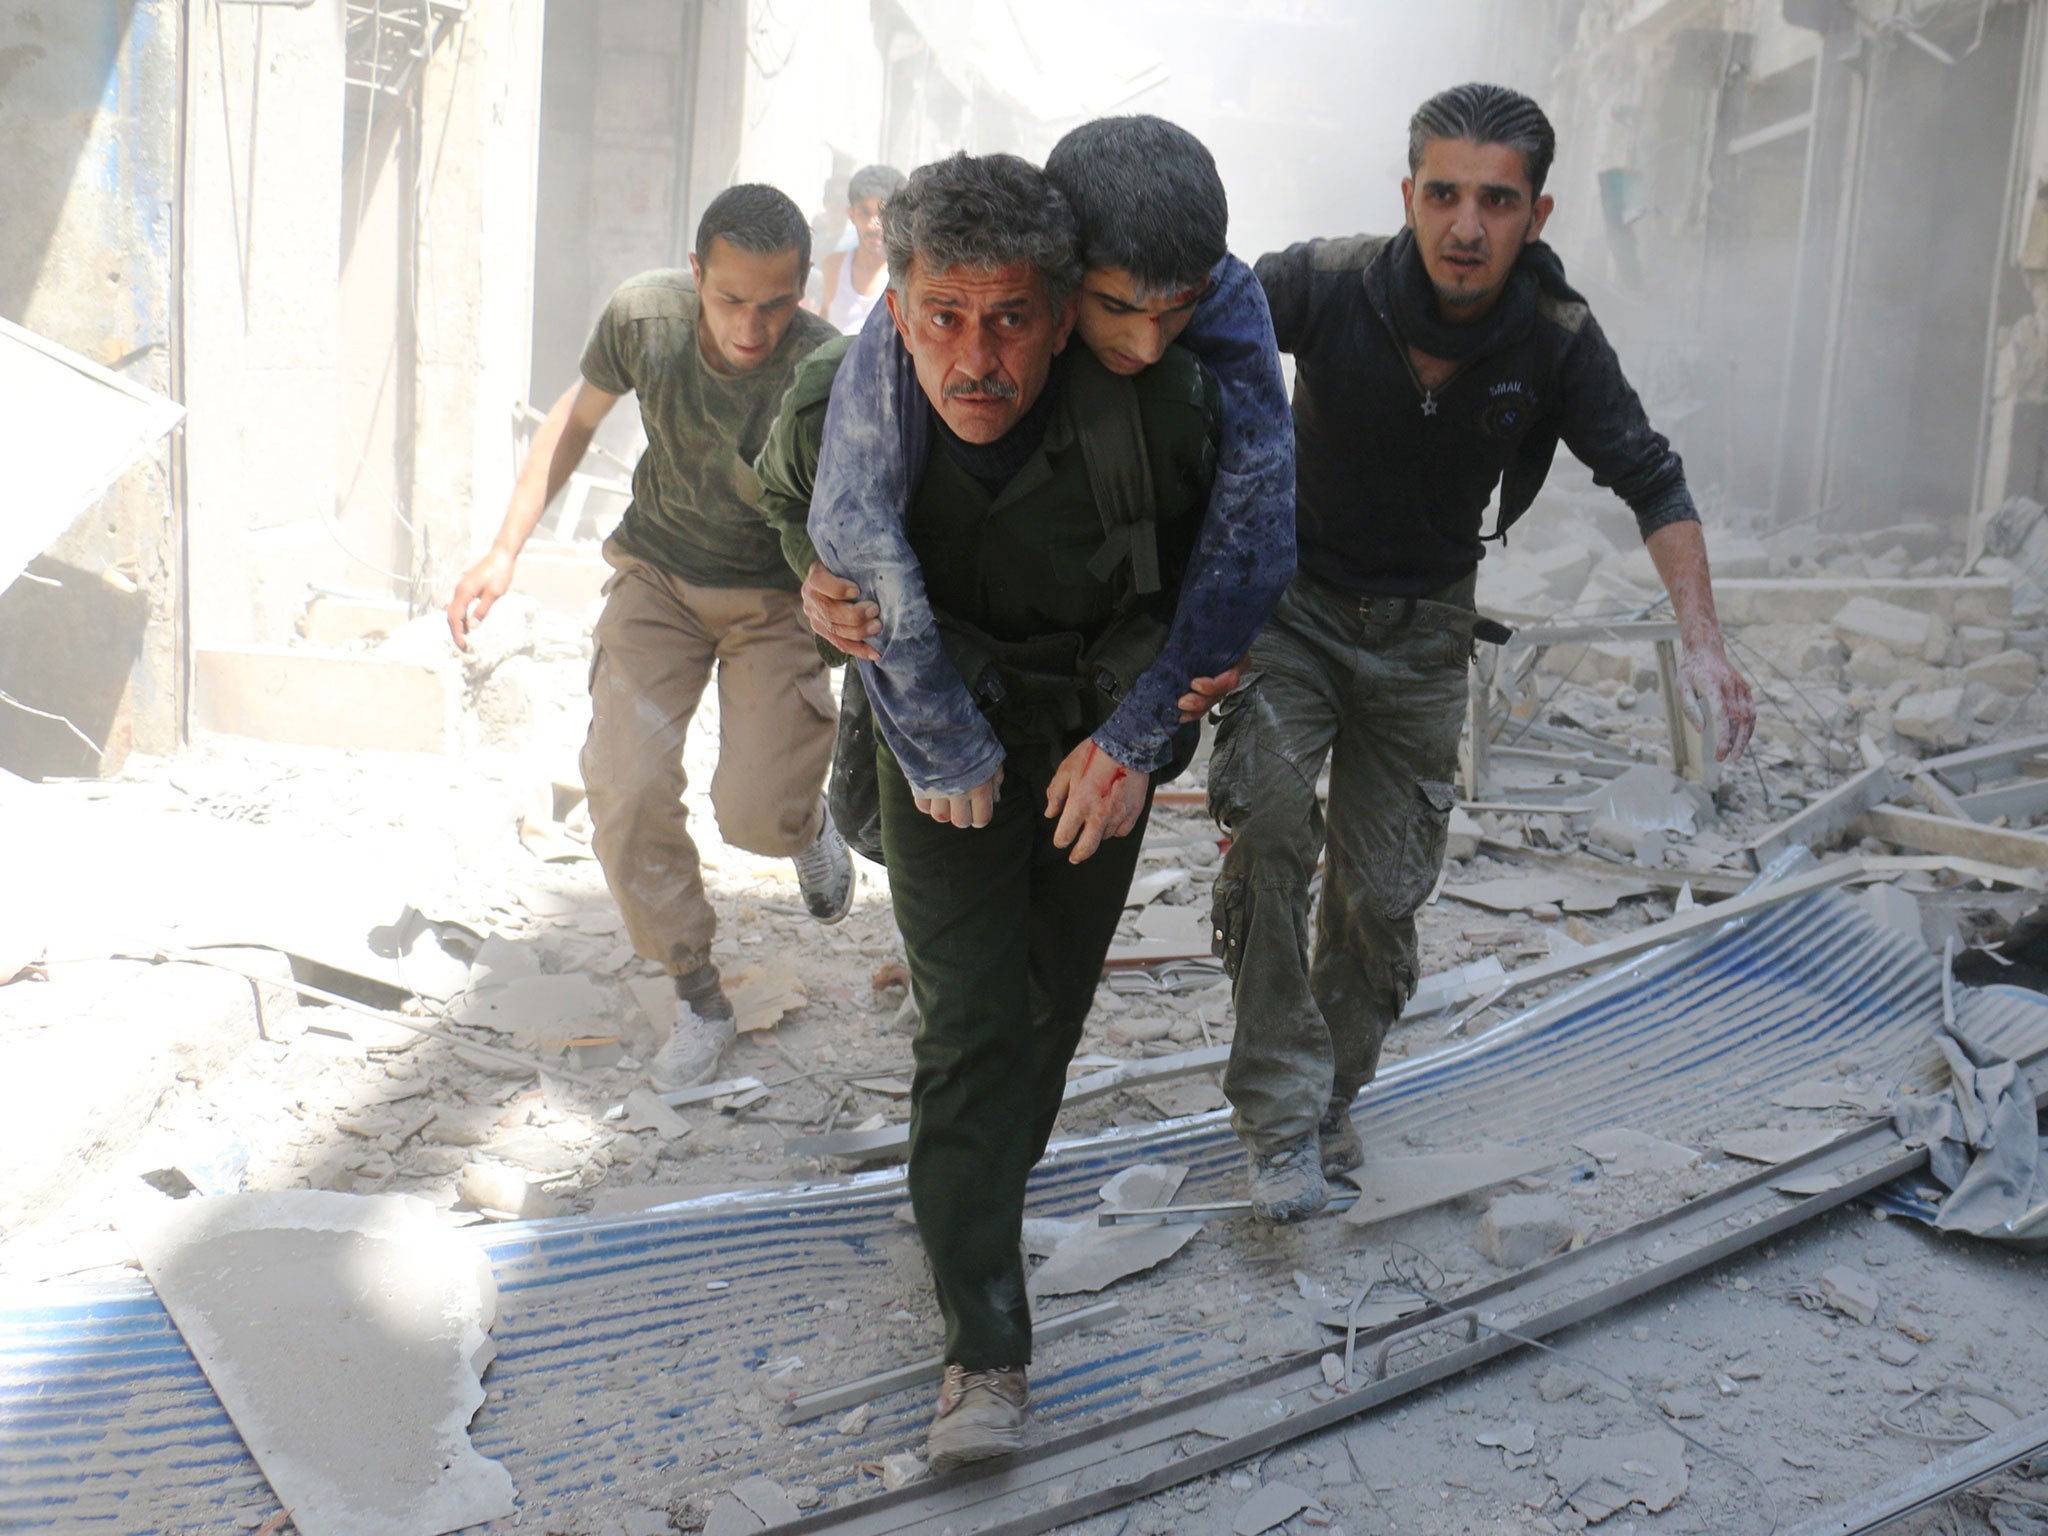 : Syrians evacuate an injured man amid the rubble of destroyed buildings following an air strike in Aleppo